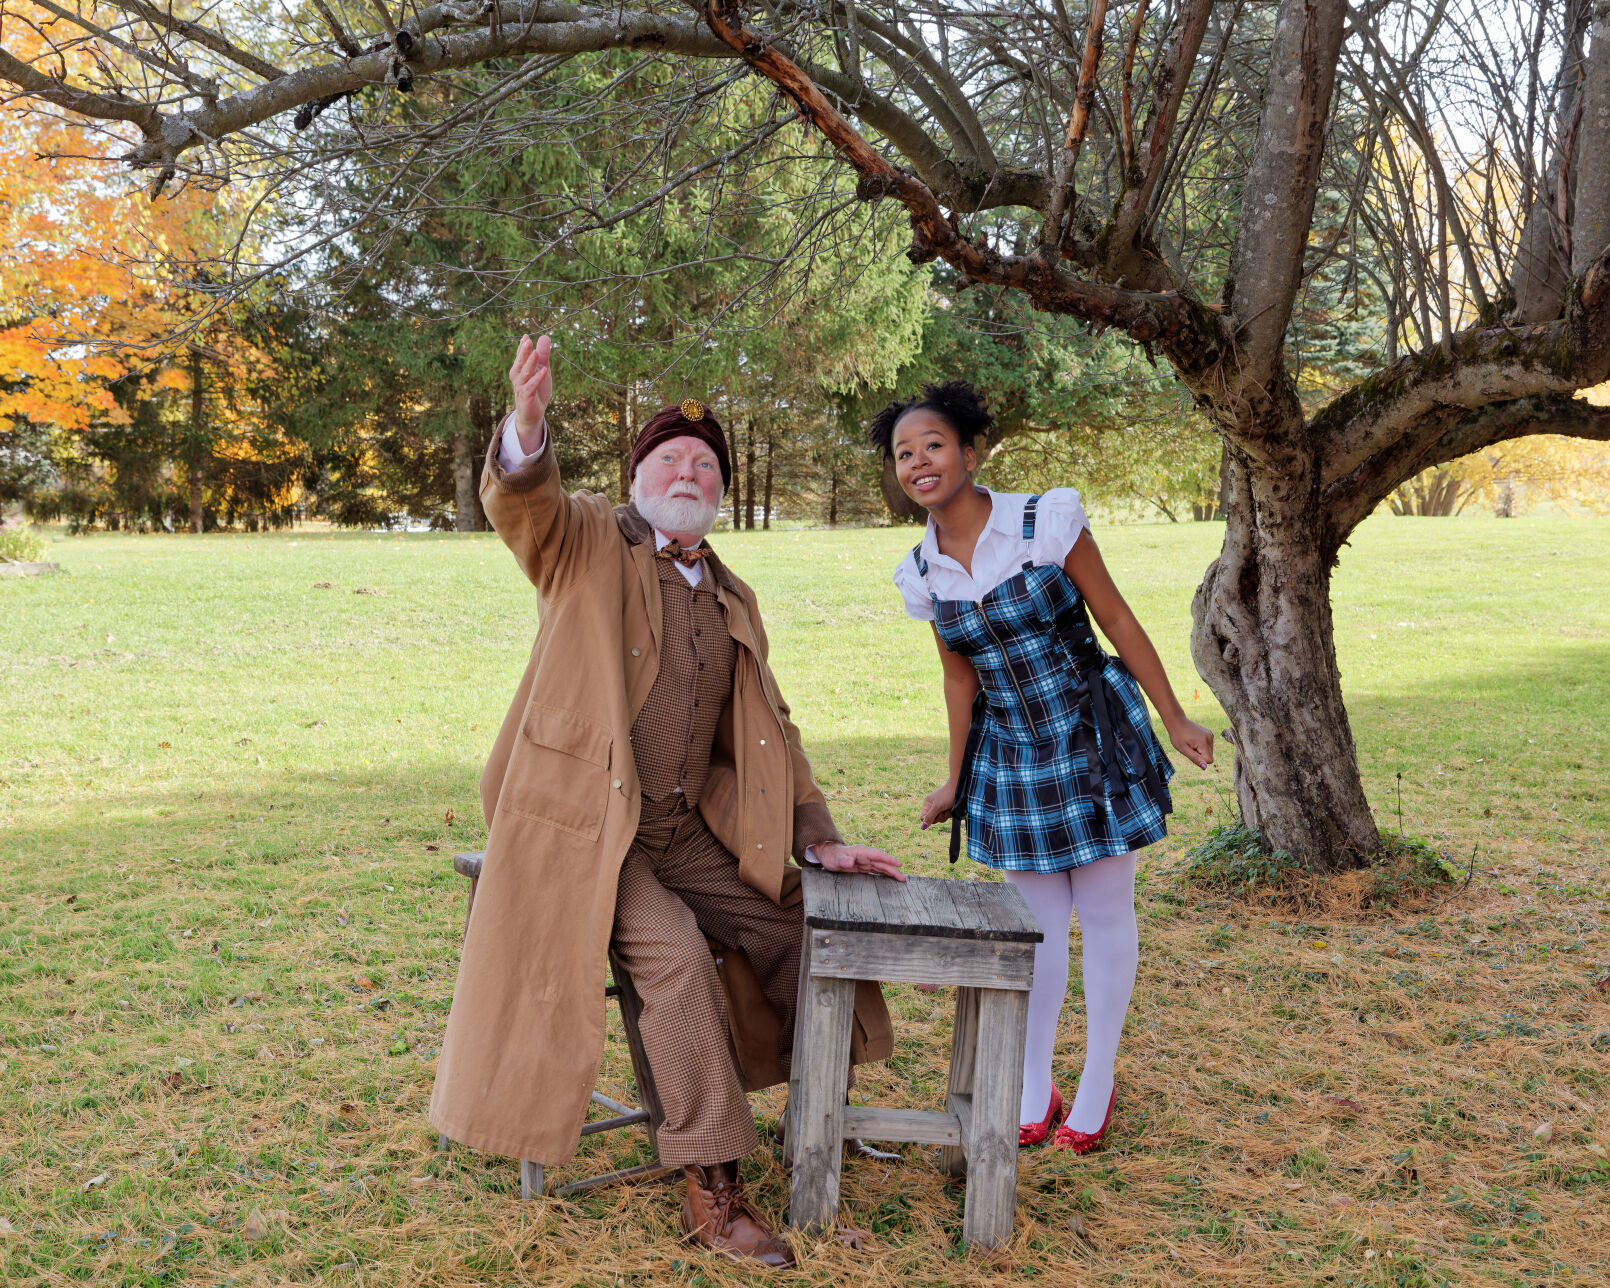 'Wizard Of Oz' opens at the Capital Repertory Theatre just in time for